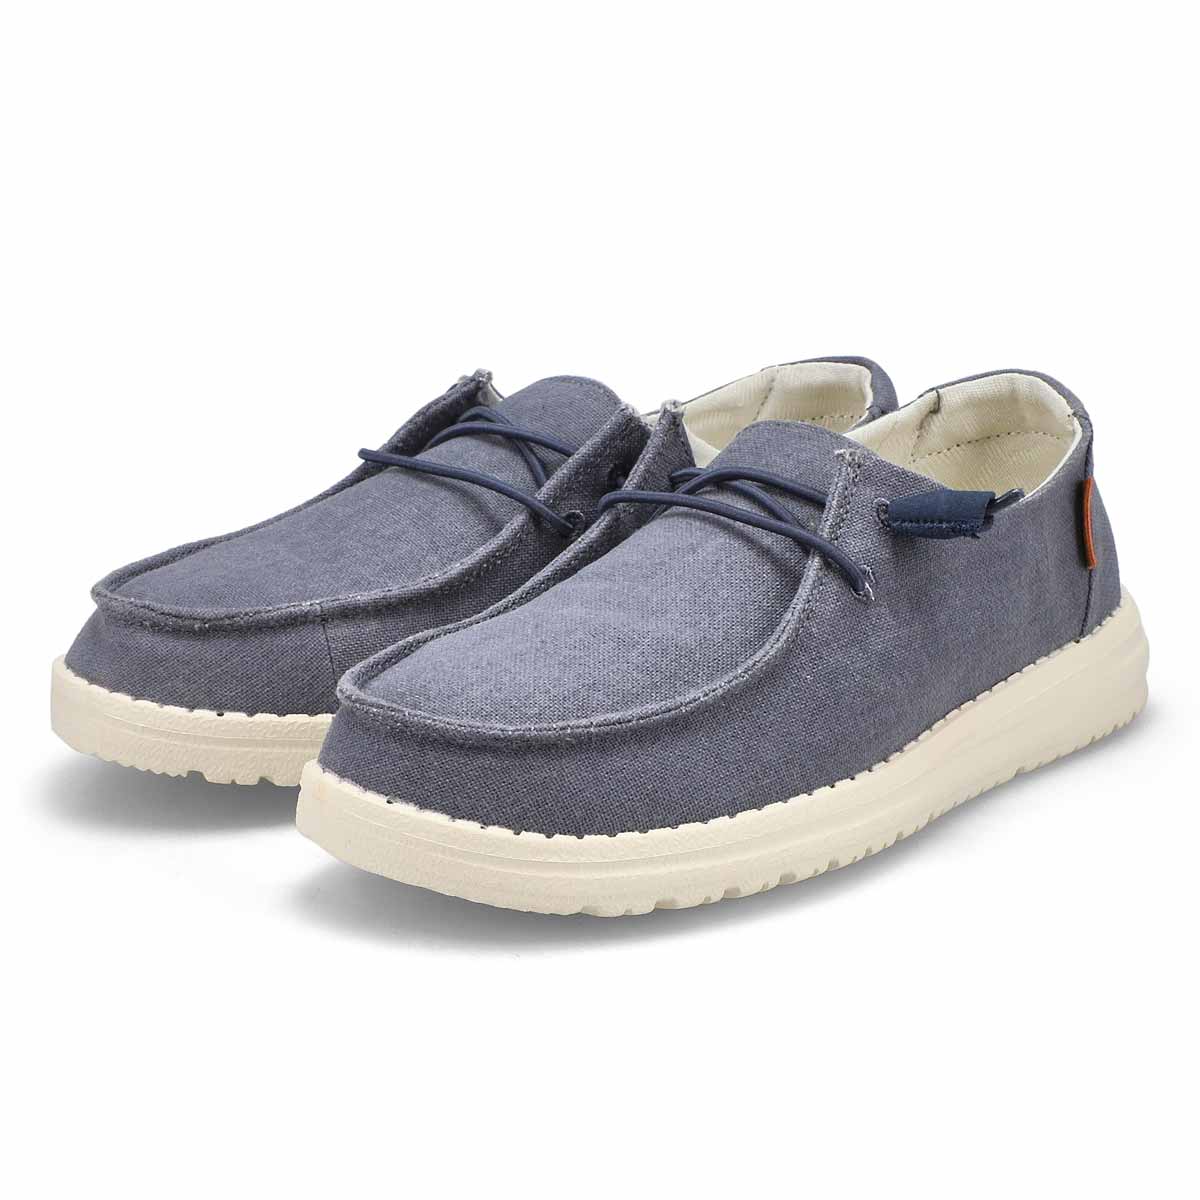 Women's Wendy Chambray Casual Shoe - Navy